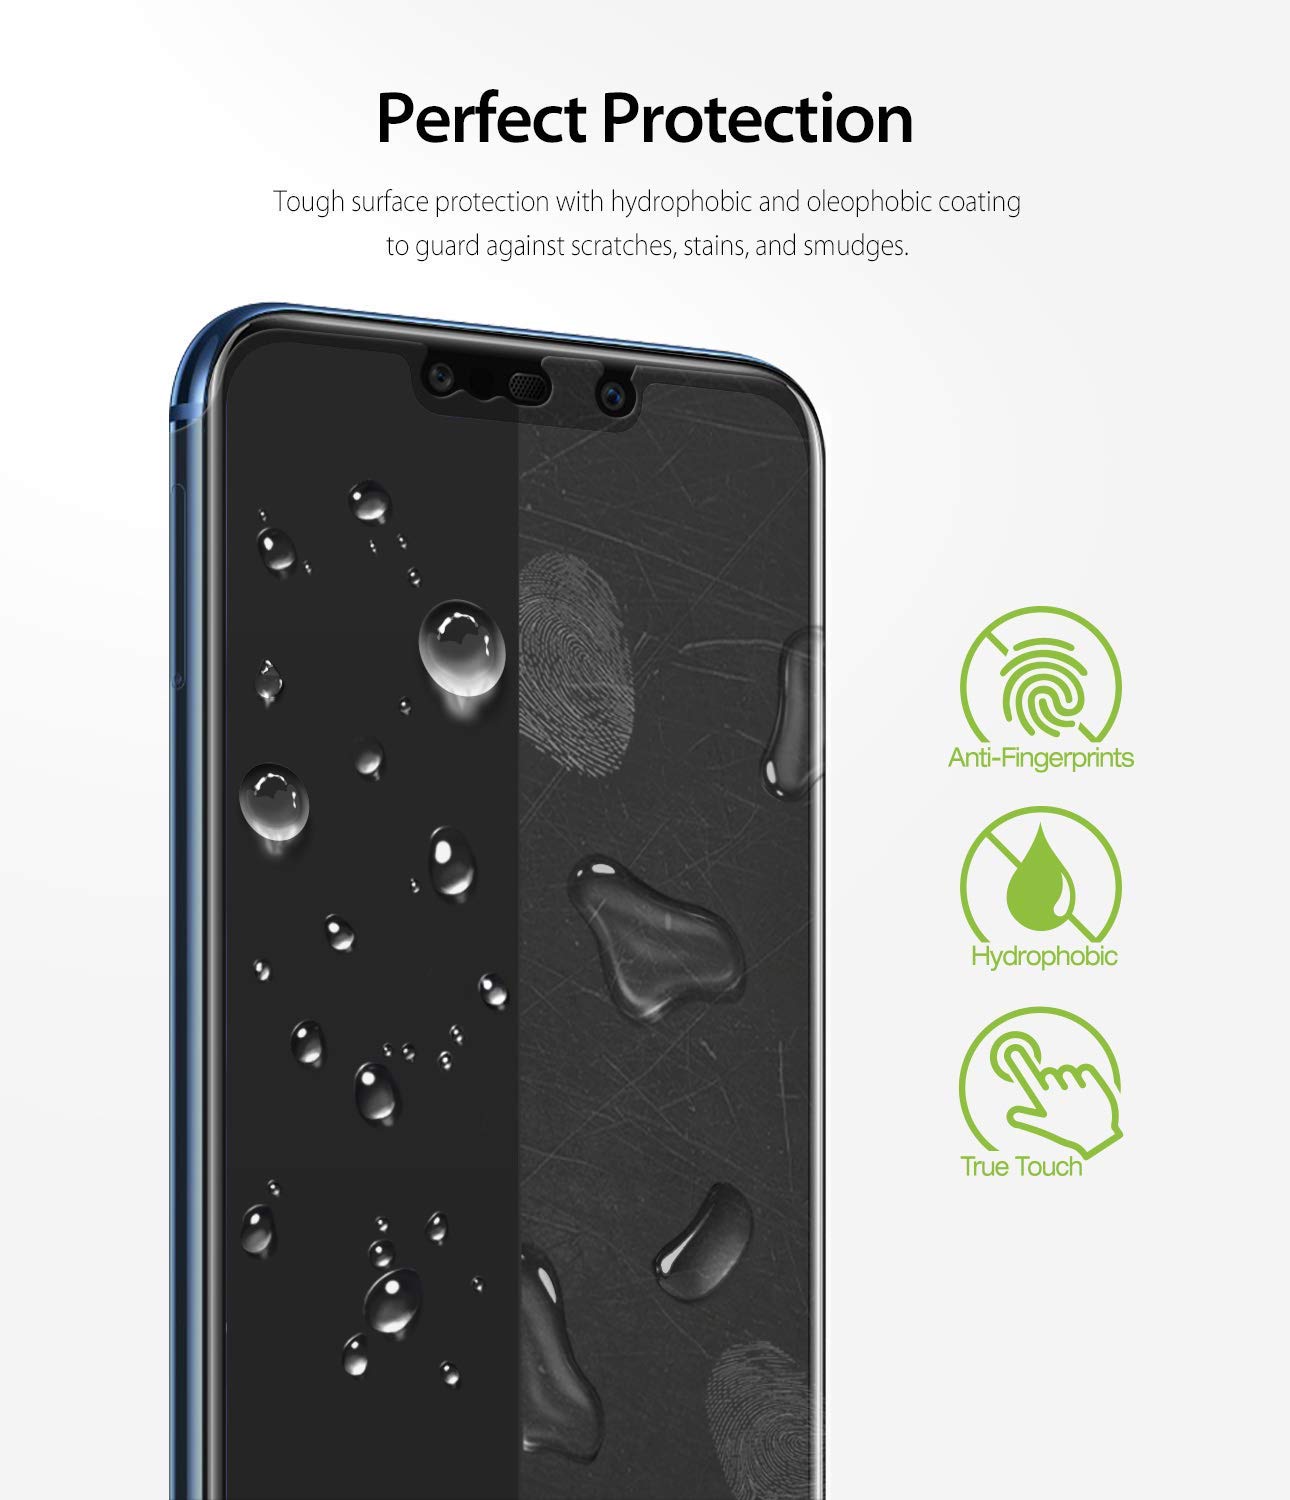 tough surface protection with hydrophobic, oleophobic coating